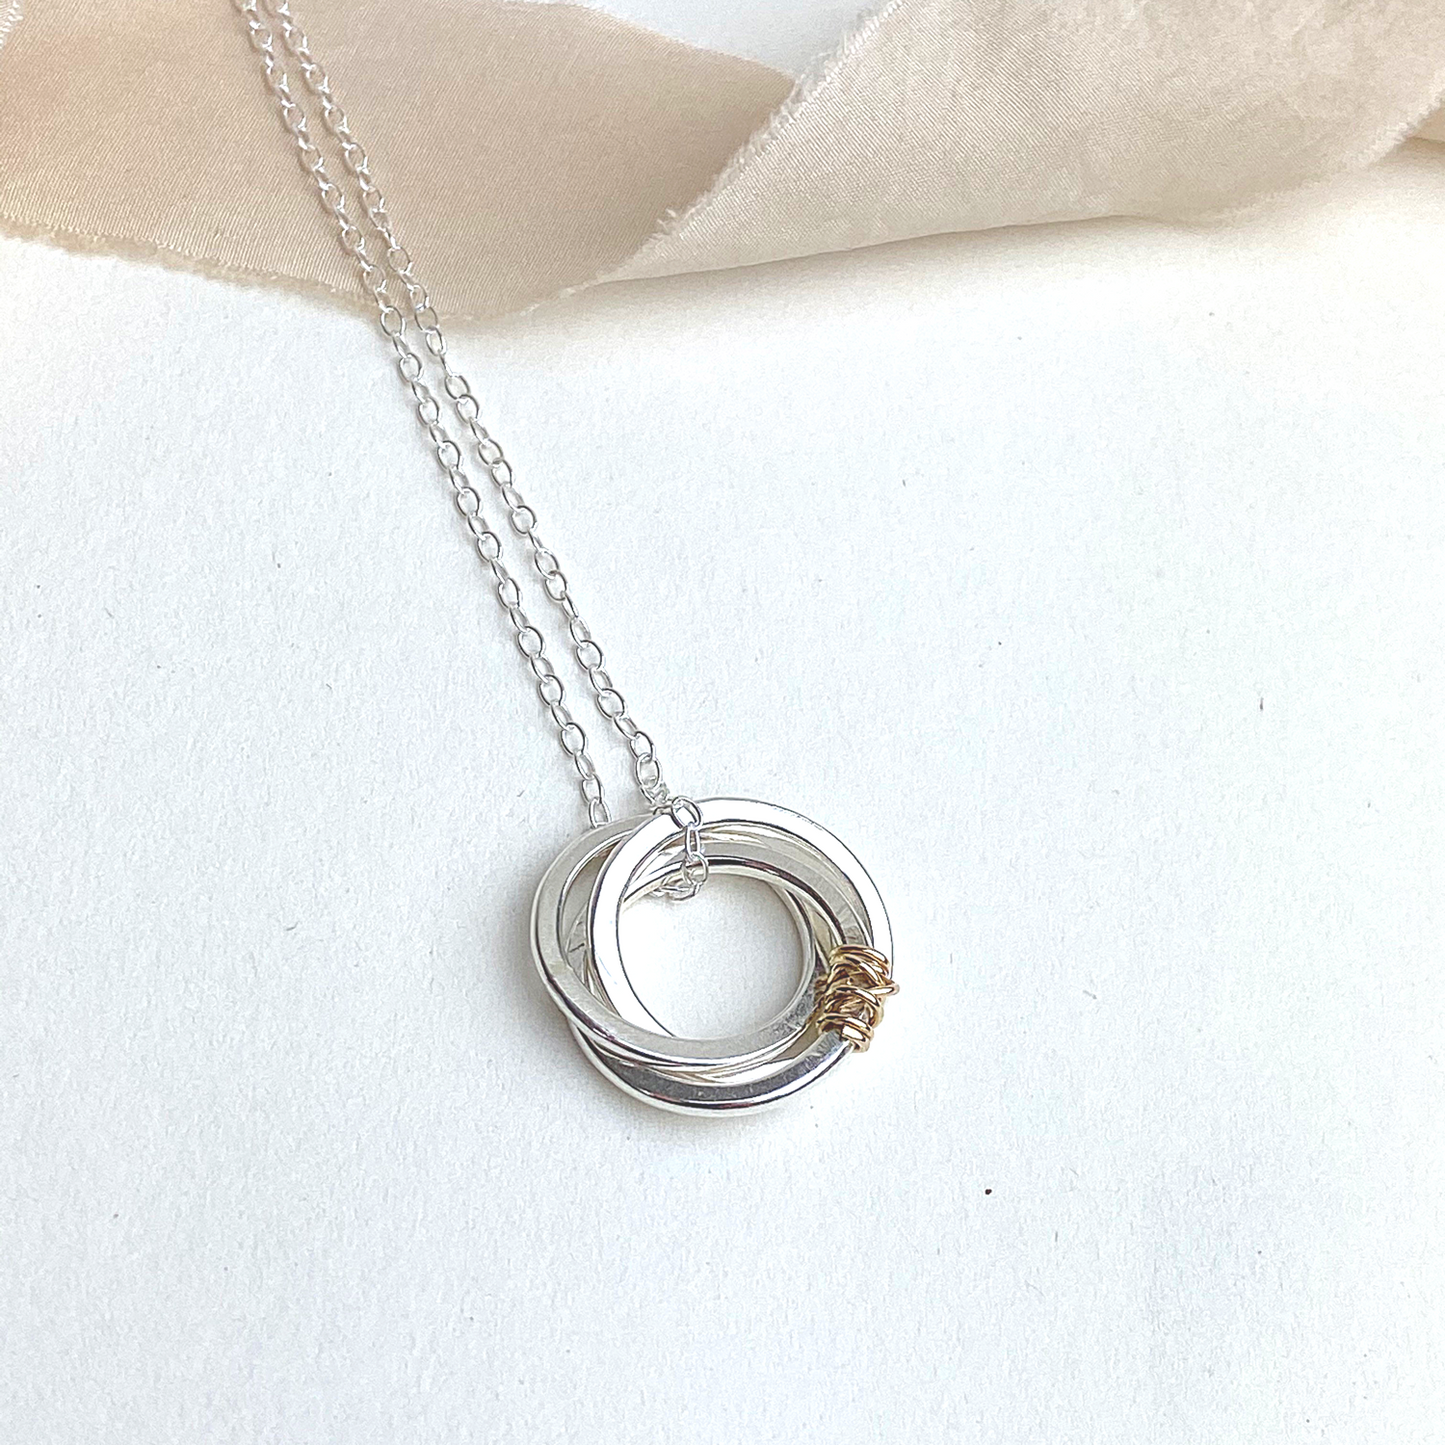 The Tanner Hoop Necklace - sterling silver hoop necklace with 12ct filled gold twist - entwined Russian style interlinked rings